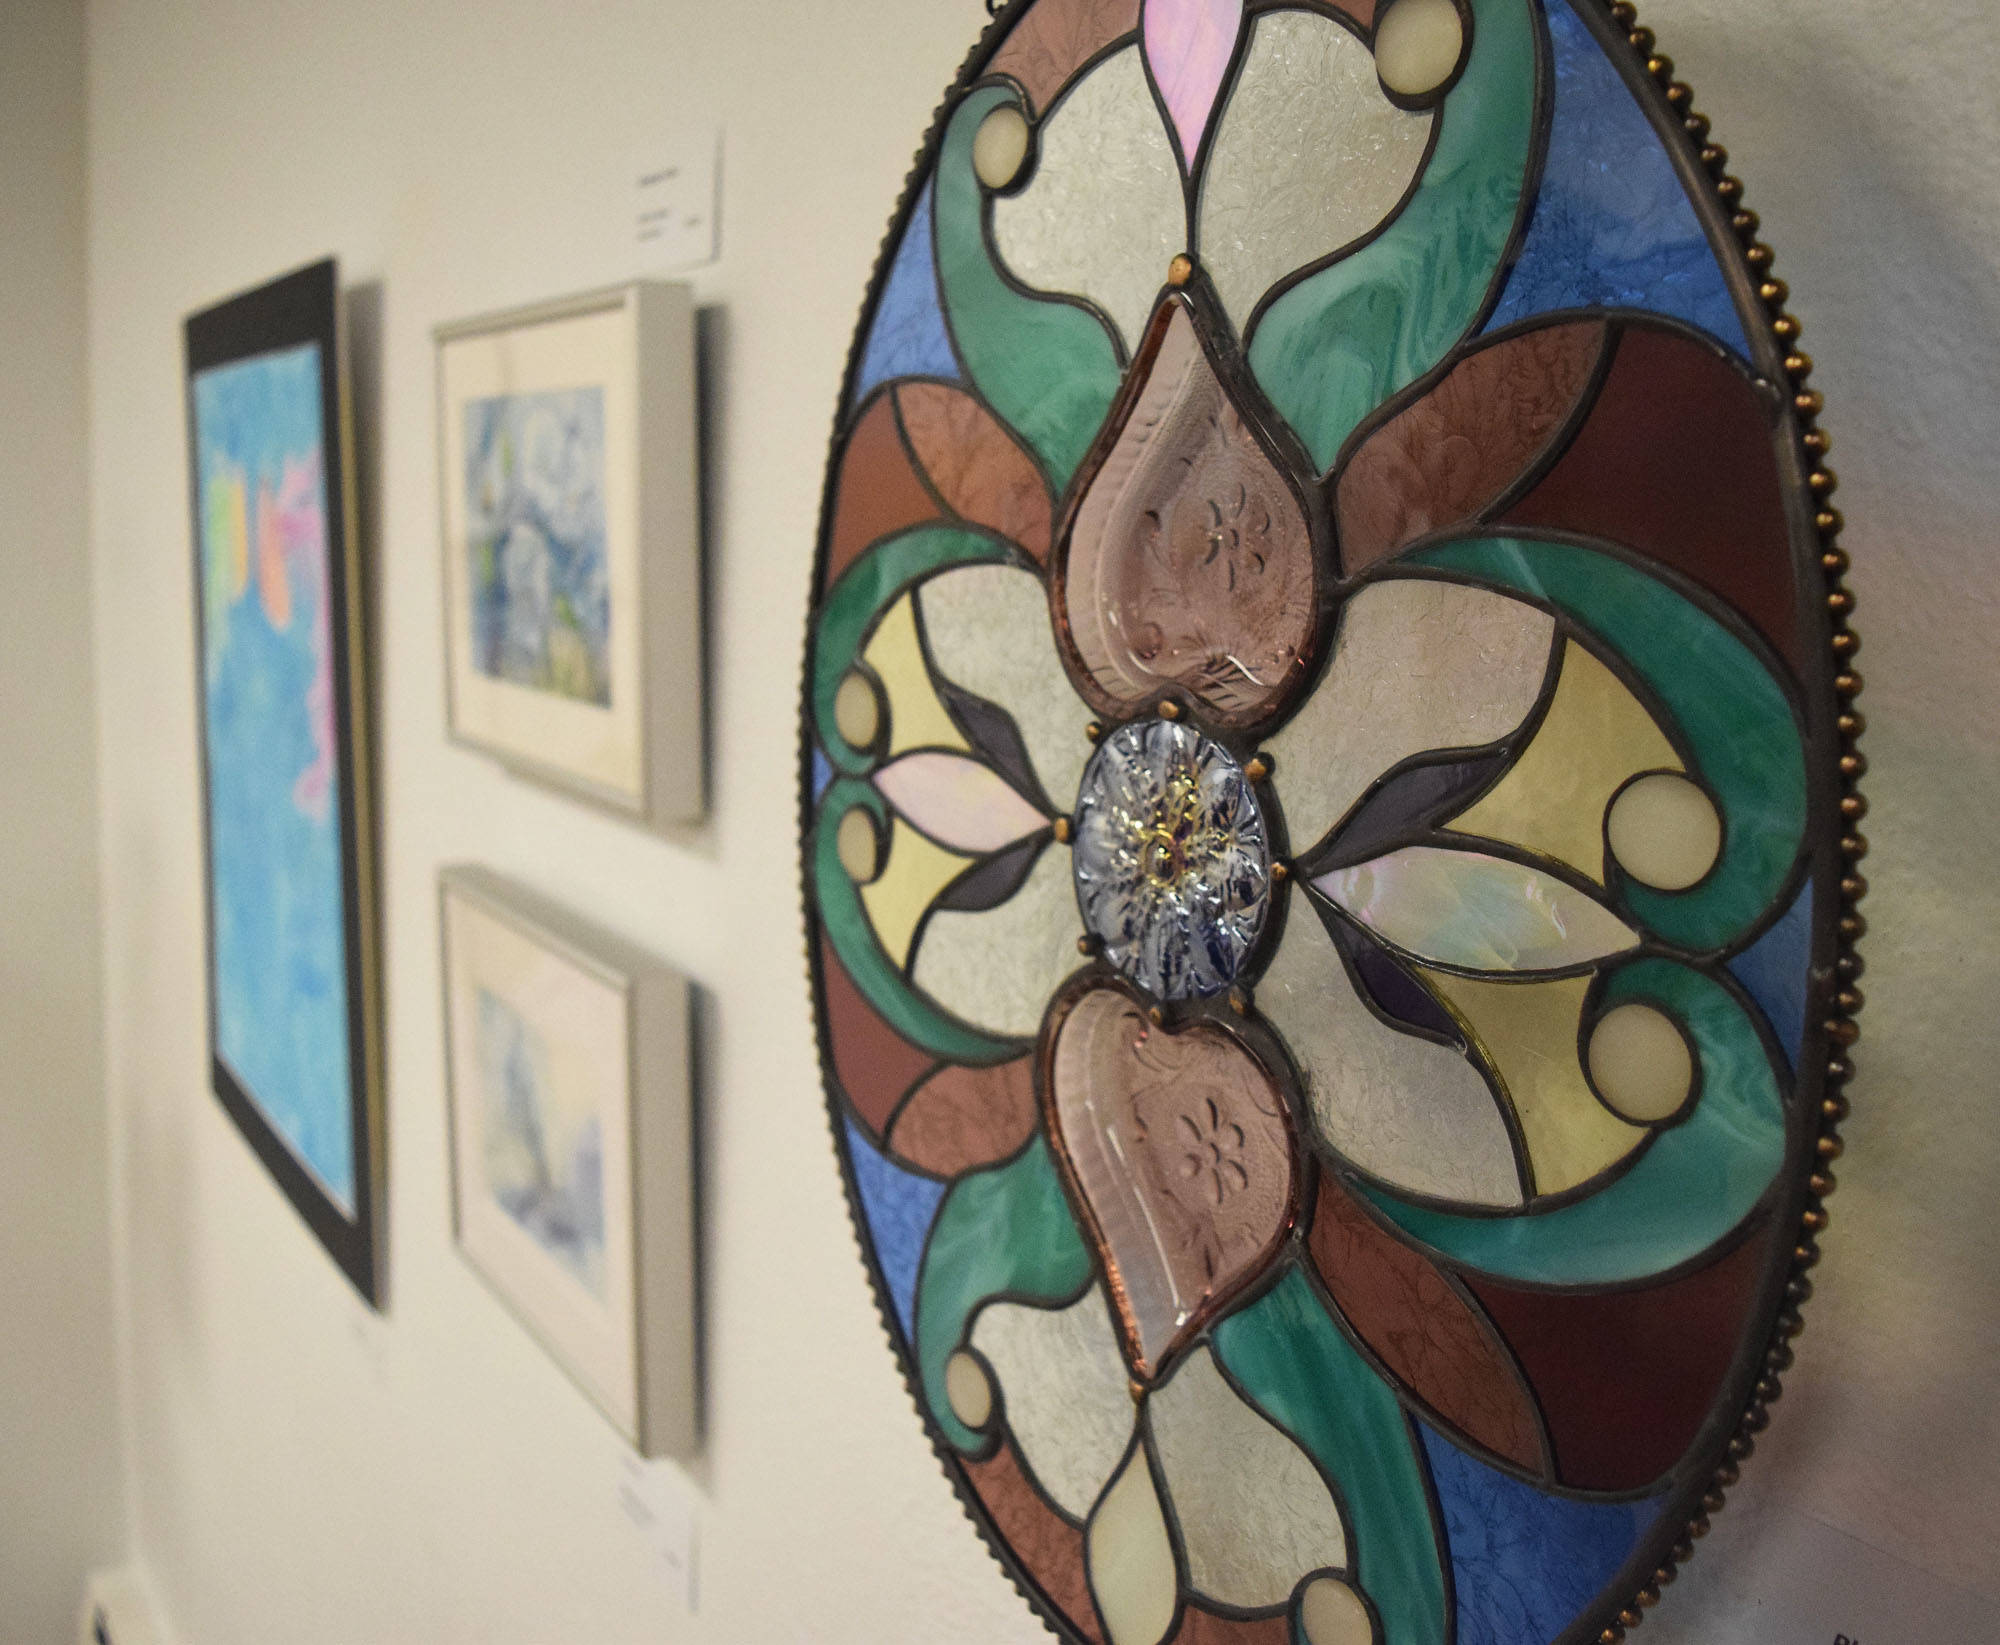 Art pieces hang on display for the “Show Us Your Heart” exhibit Thursday at the Kenai Fine Arts Center. (Photo by Joey Klecka/Peninsula Clarion)